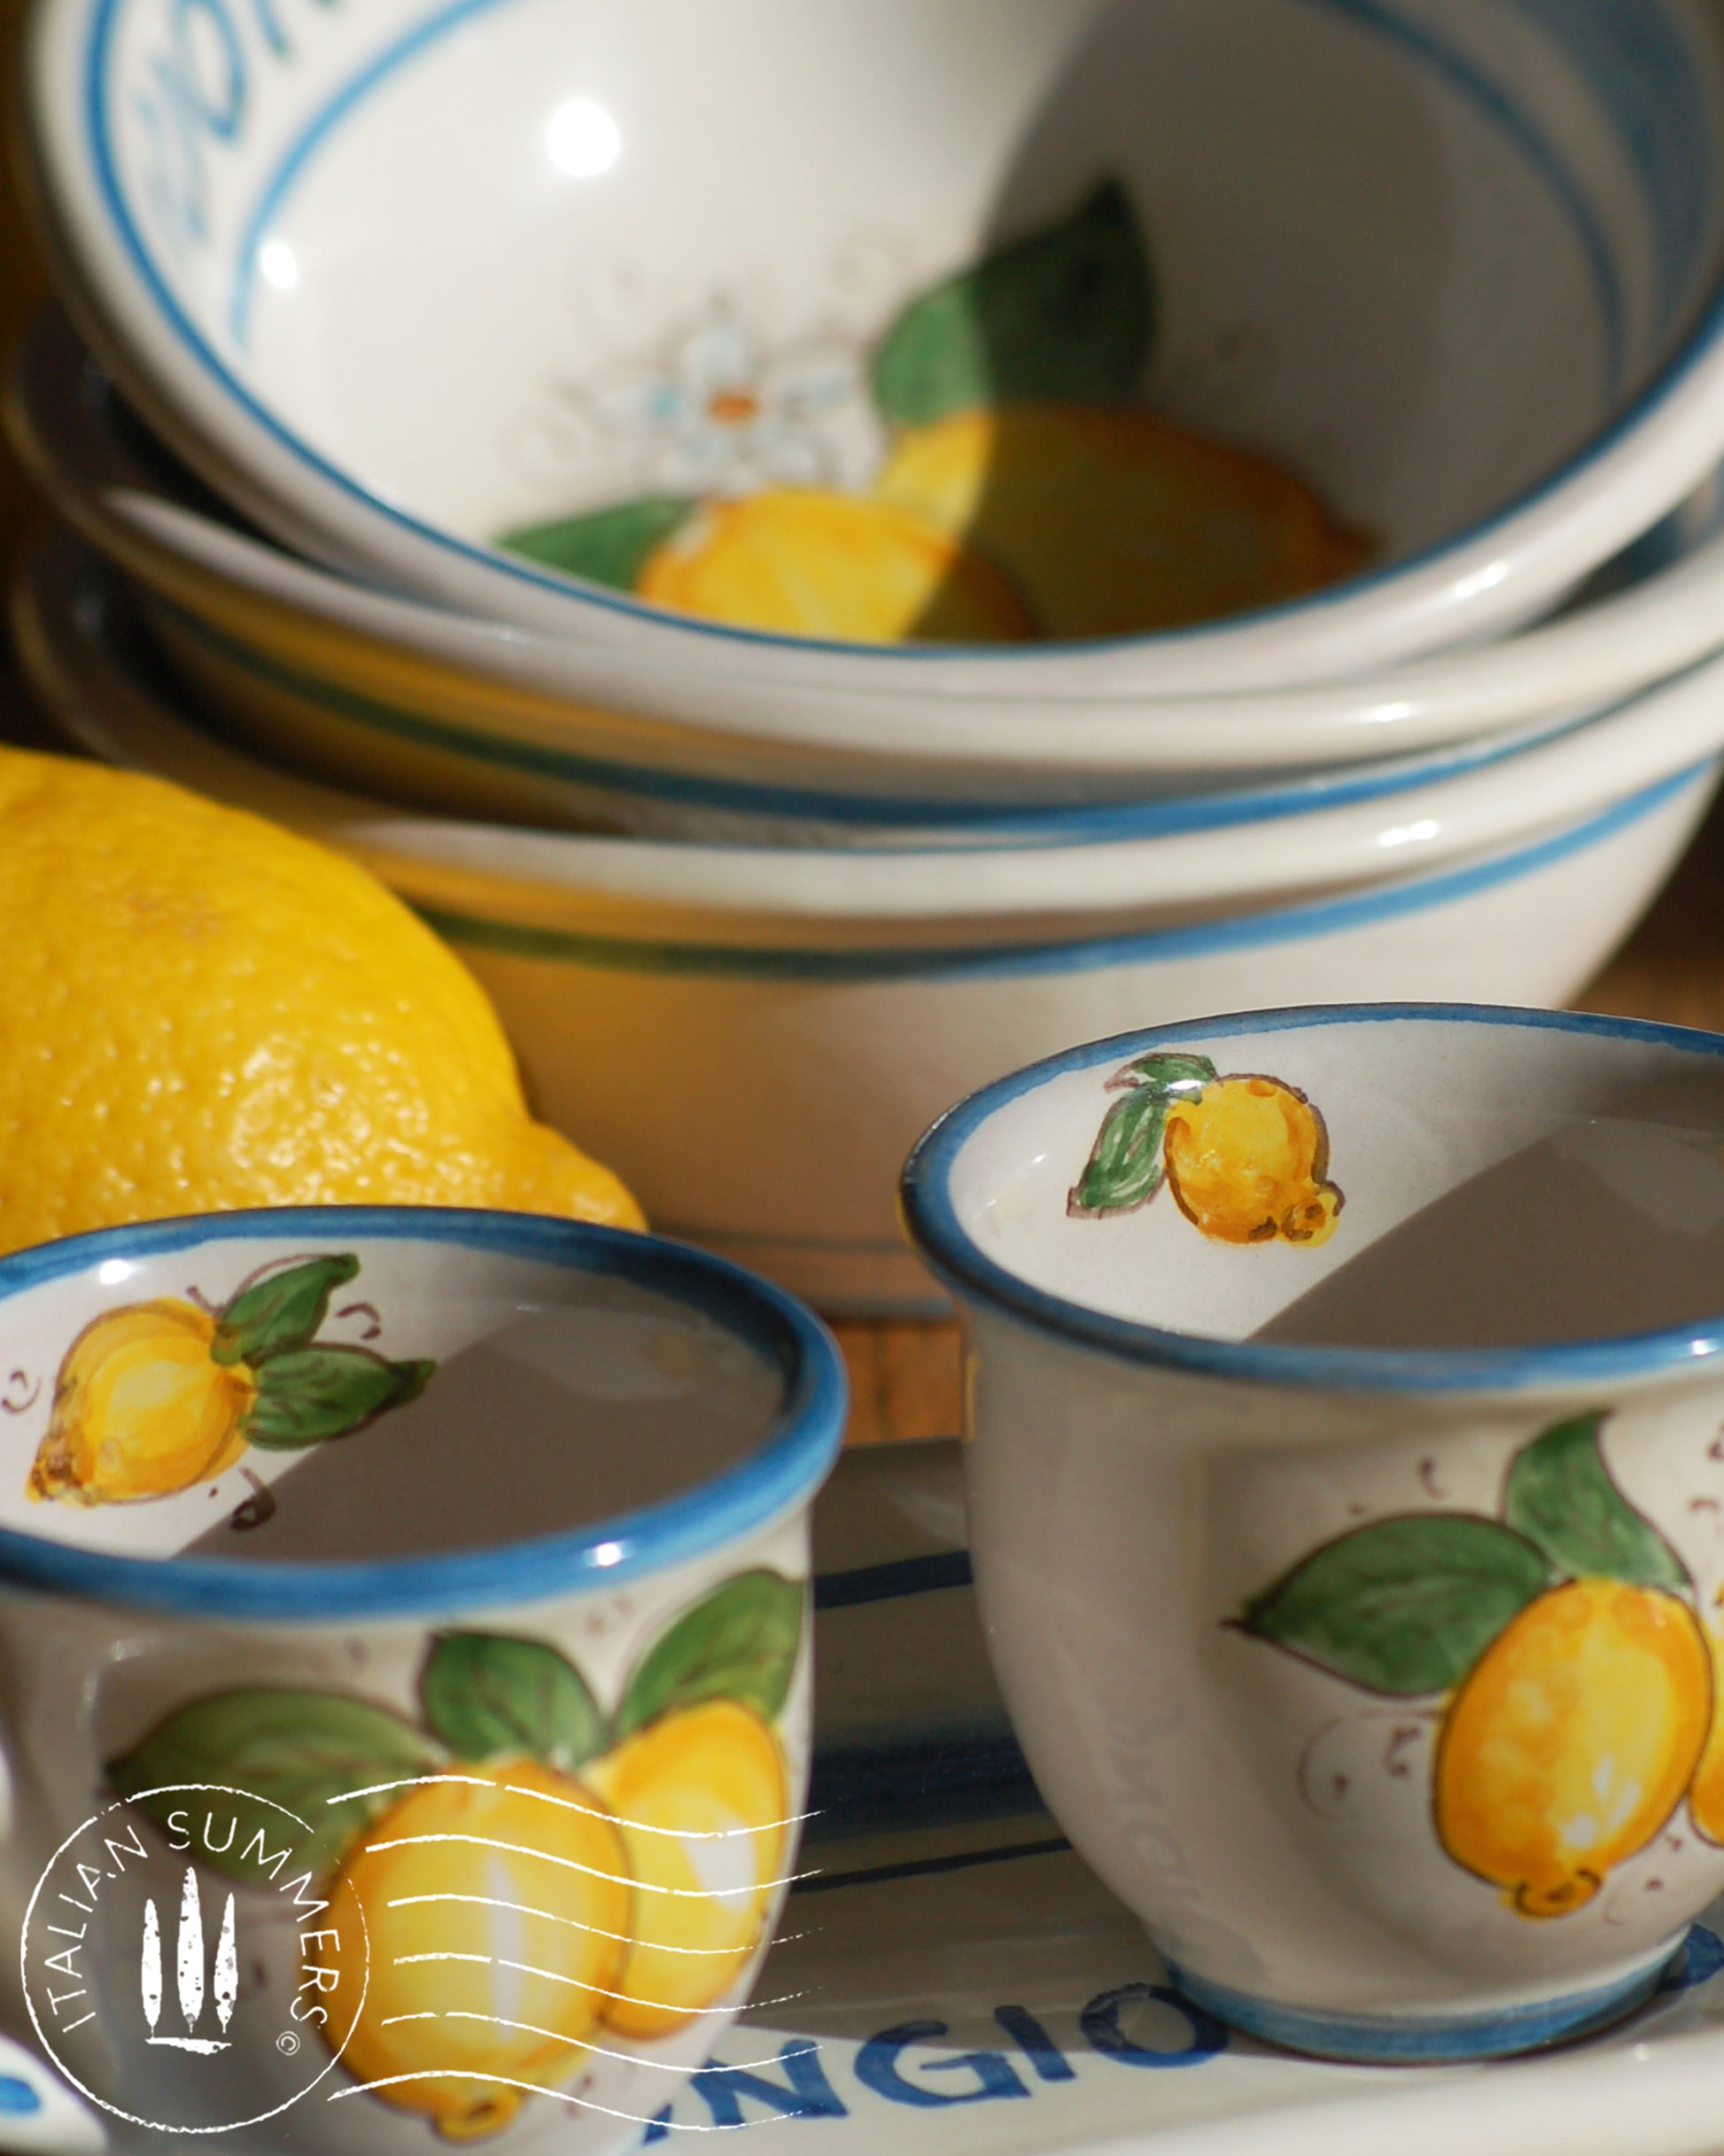 A bright and colorful Italian Maiolica ceramic espresso coffee set, two demitasse and a serving tray featuring sunny Sicilian lemons and a blue decoration with the text Buongiorno which means Good Morning in Italian.  hand made in Sicily